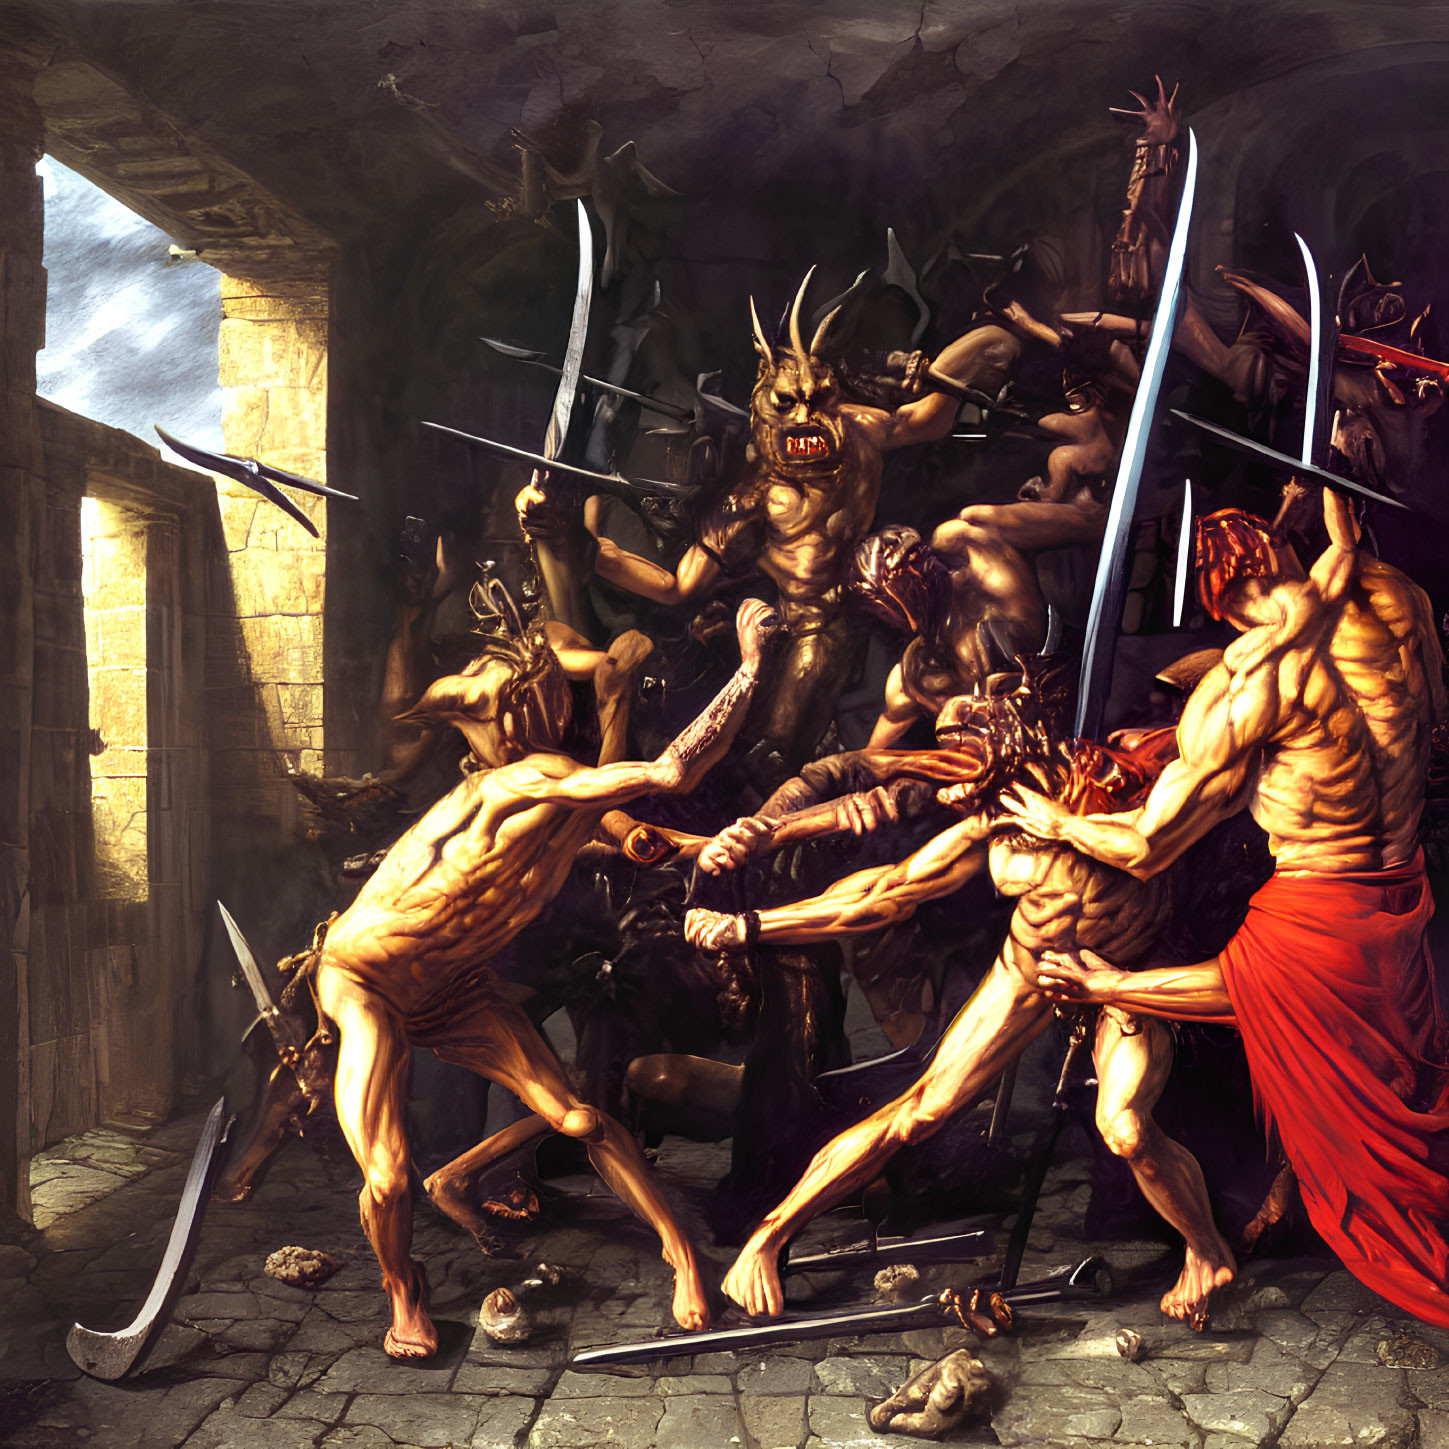 Muscular demonic figures in chaotic battle scene amidst stone ruins